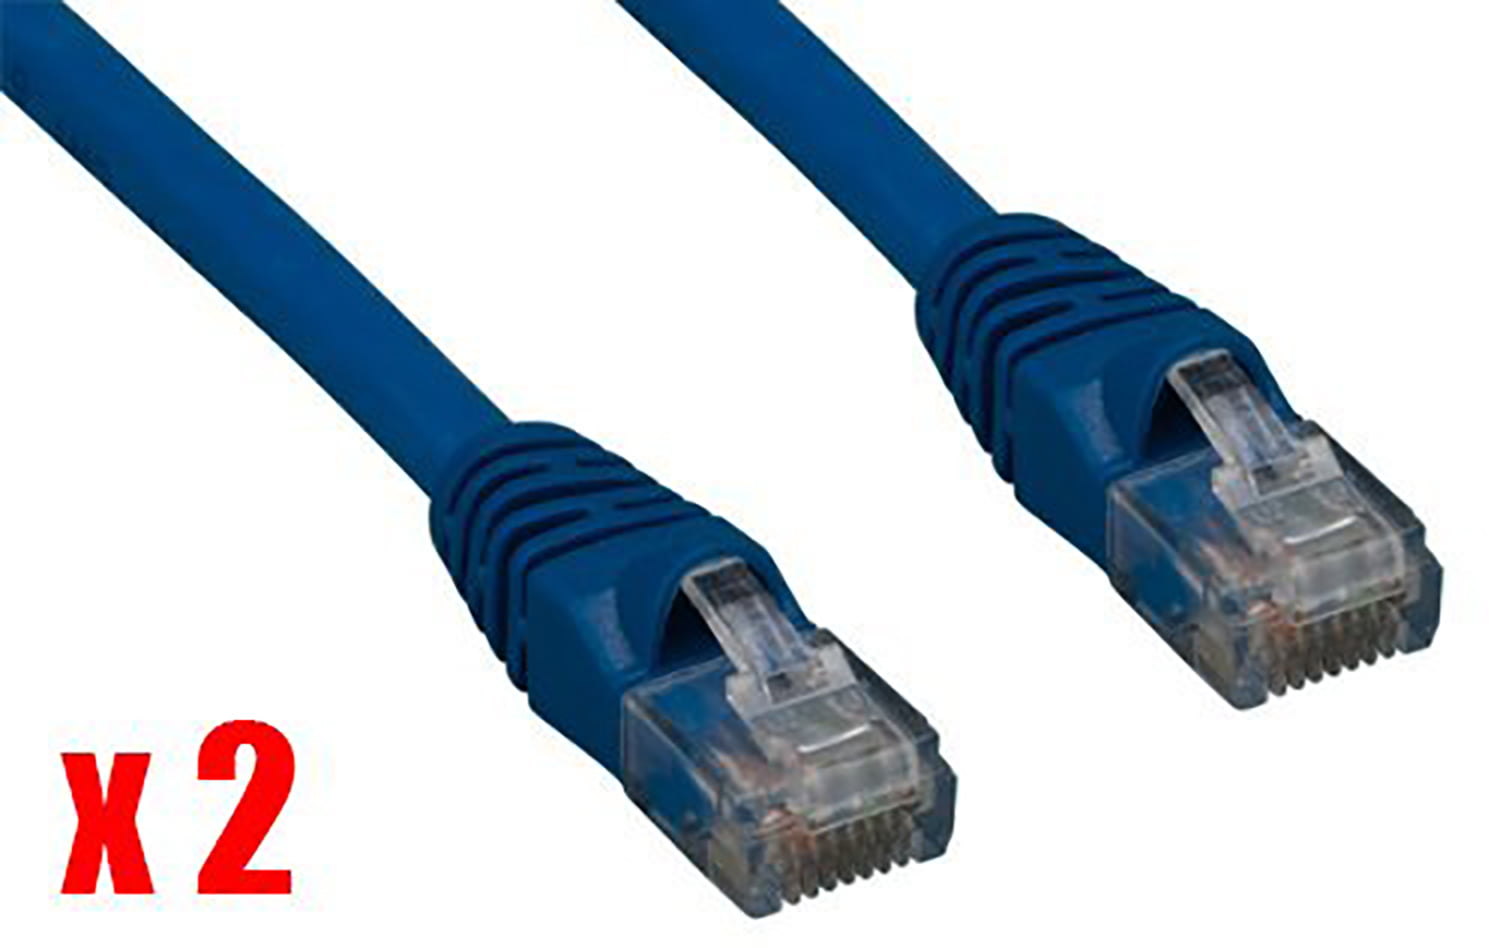 Generic 4441025 XBox PS3 Laptop PS2 Mac and XBox 360 to hook up on high speed internet from DSL or Cable internet BLUE Gold Plated 50FT CAT5 CAT5e RJ45 PATCH ETHERNET NETWORK CABLE 50 FT For PC